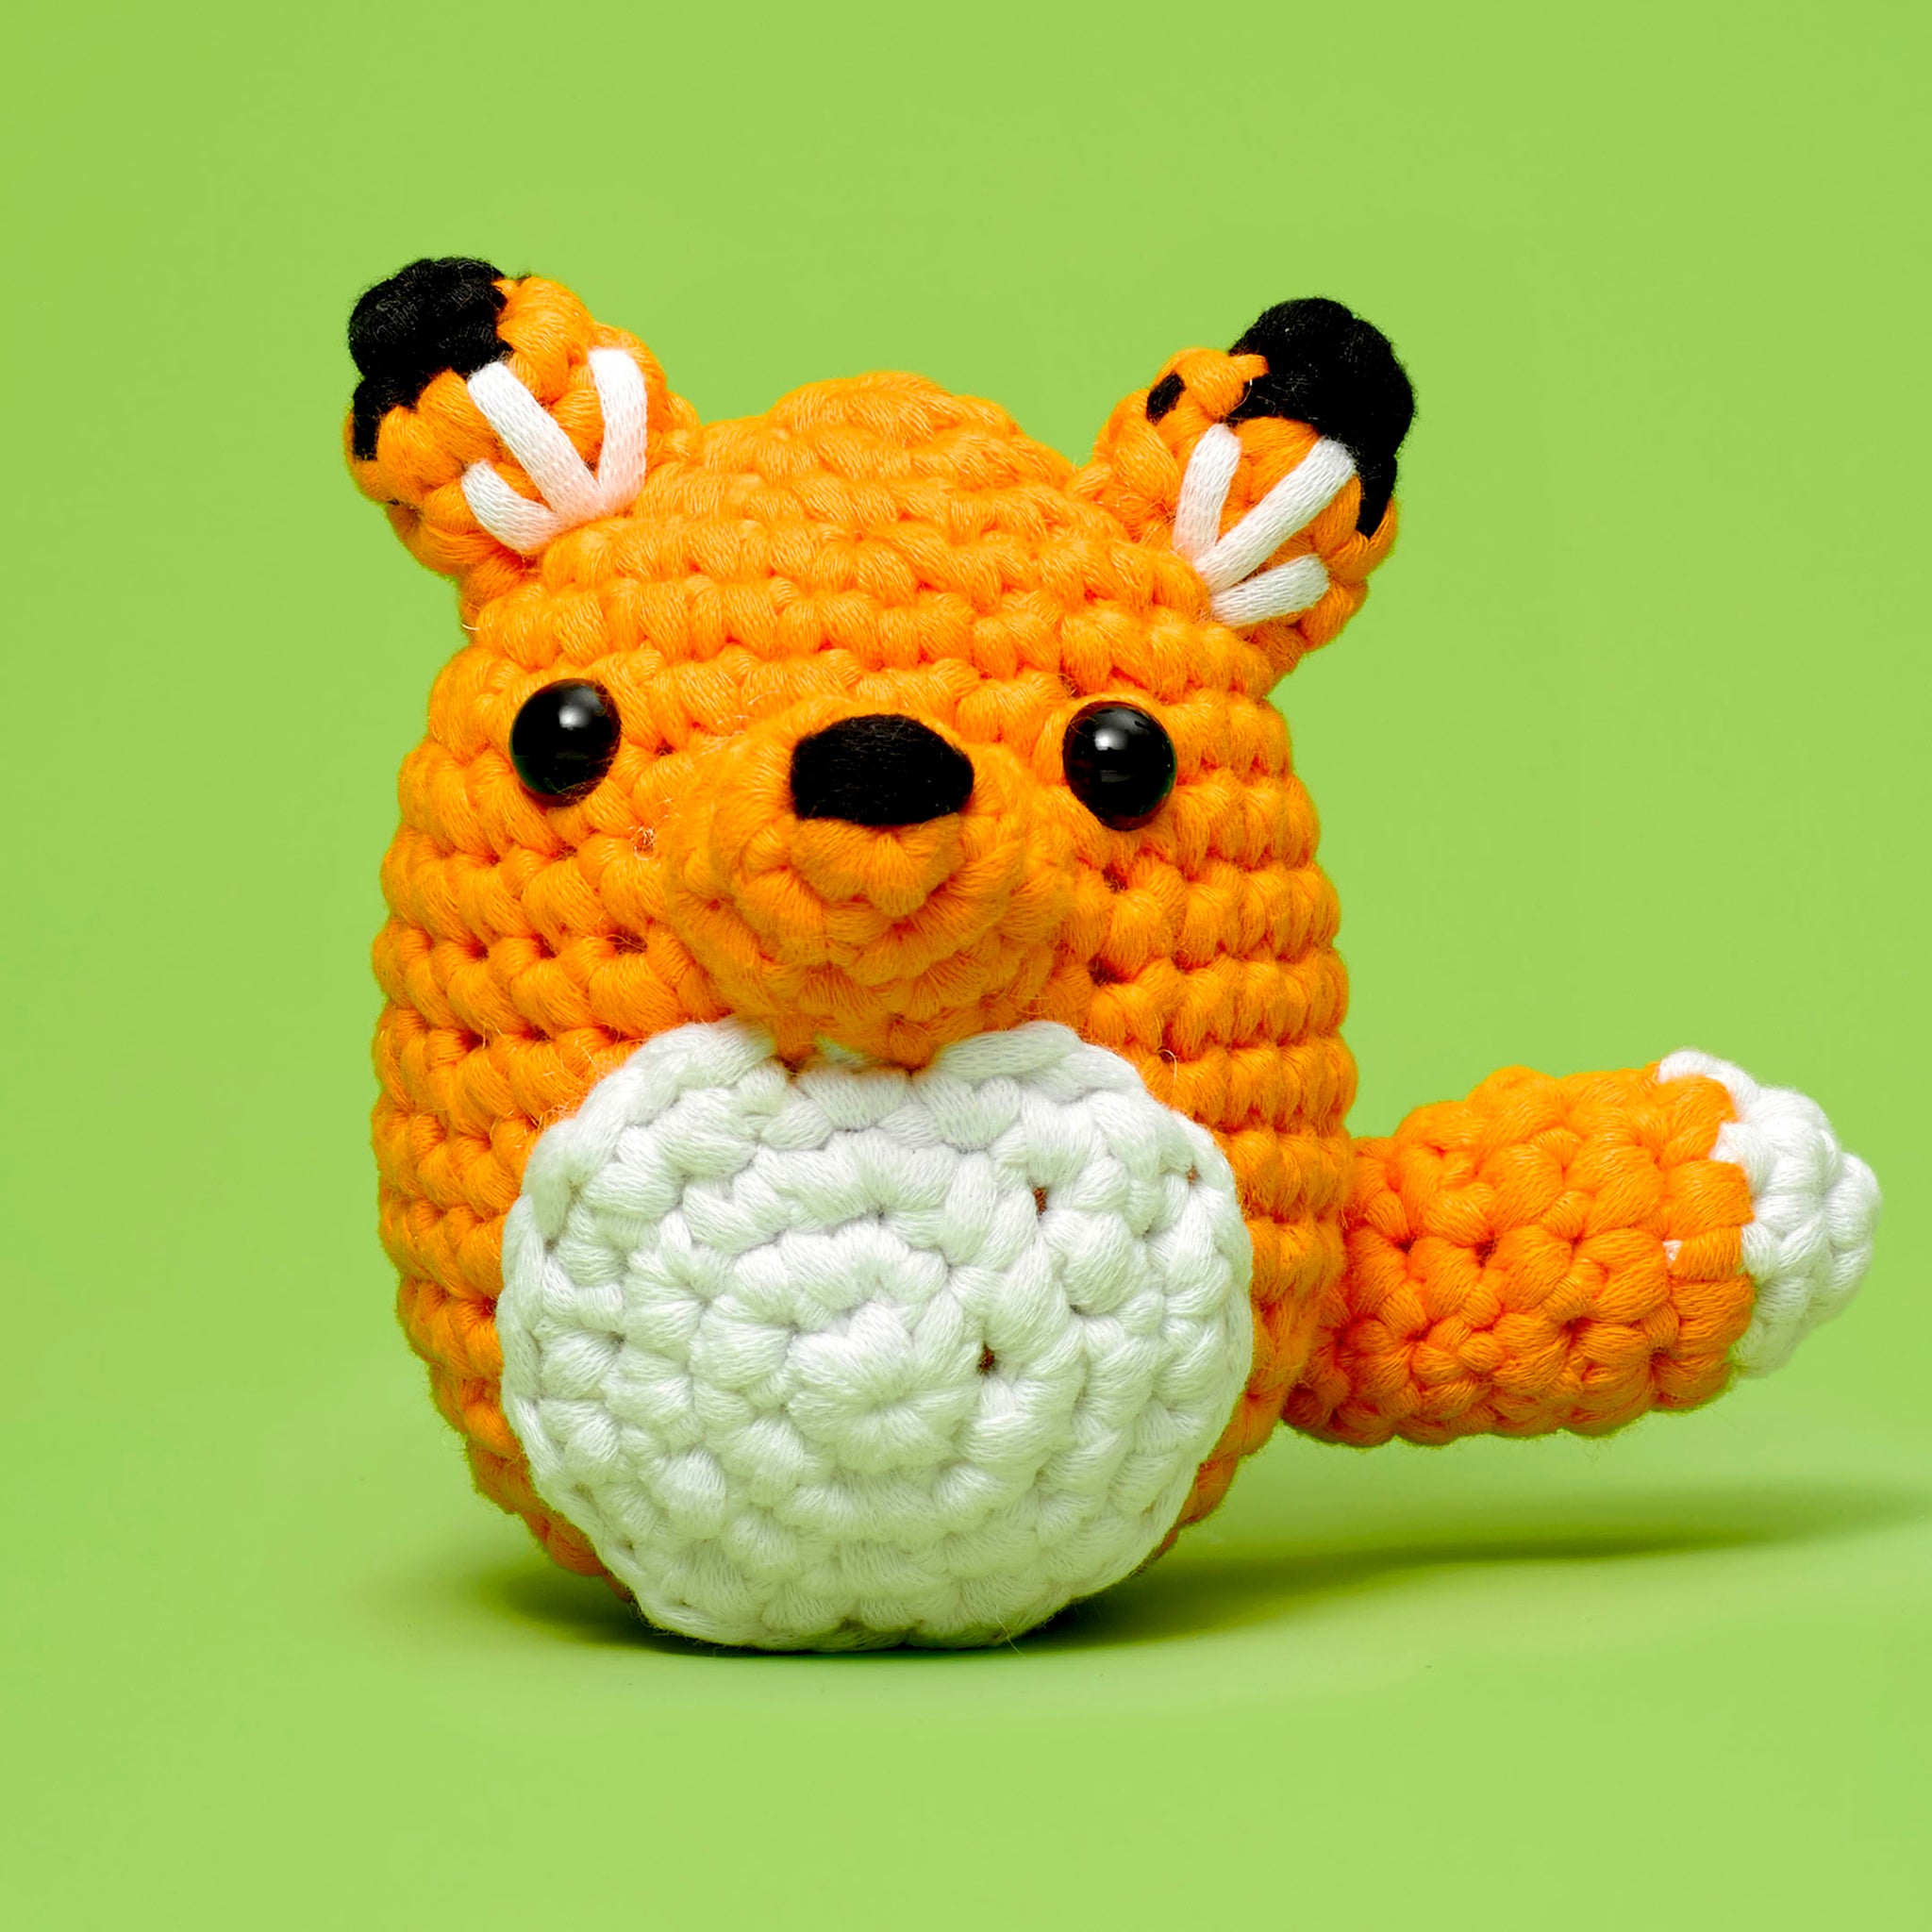 16 Amazing Gifts for Crocheters - You Should Craft